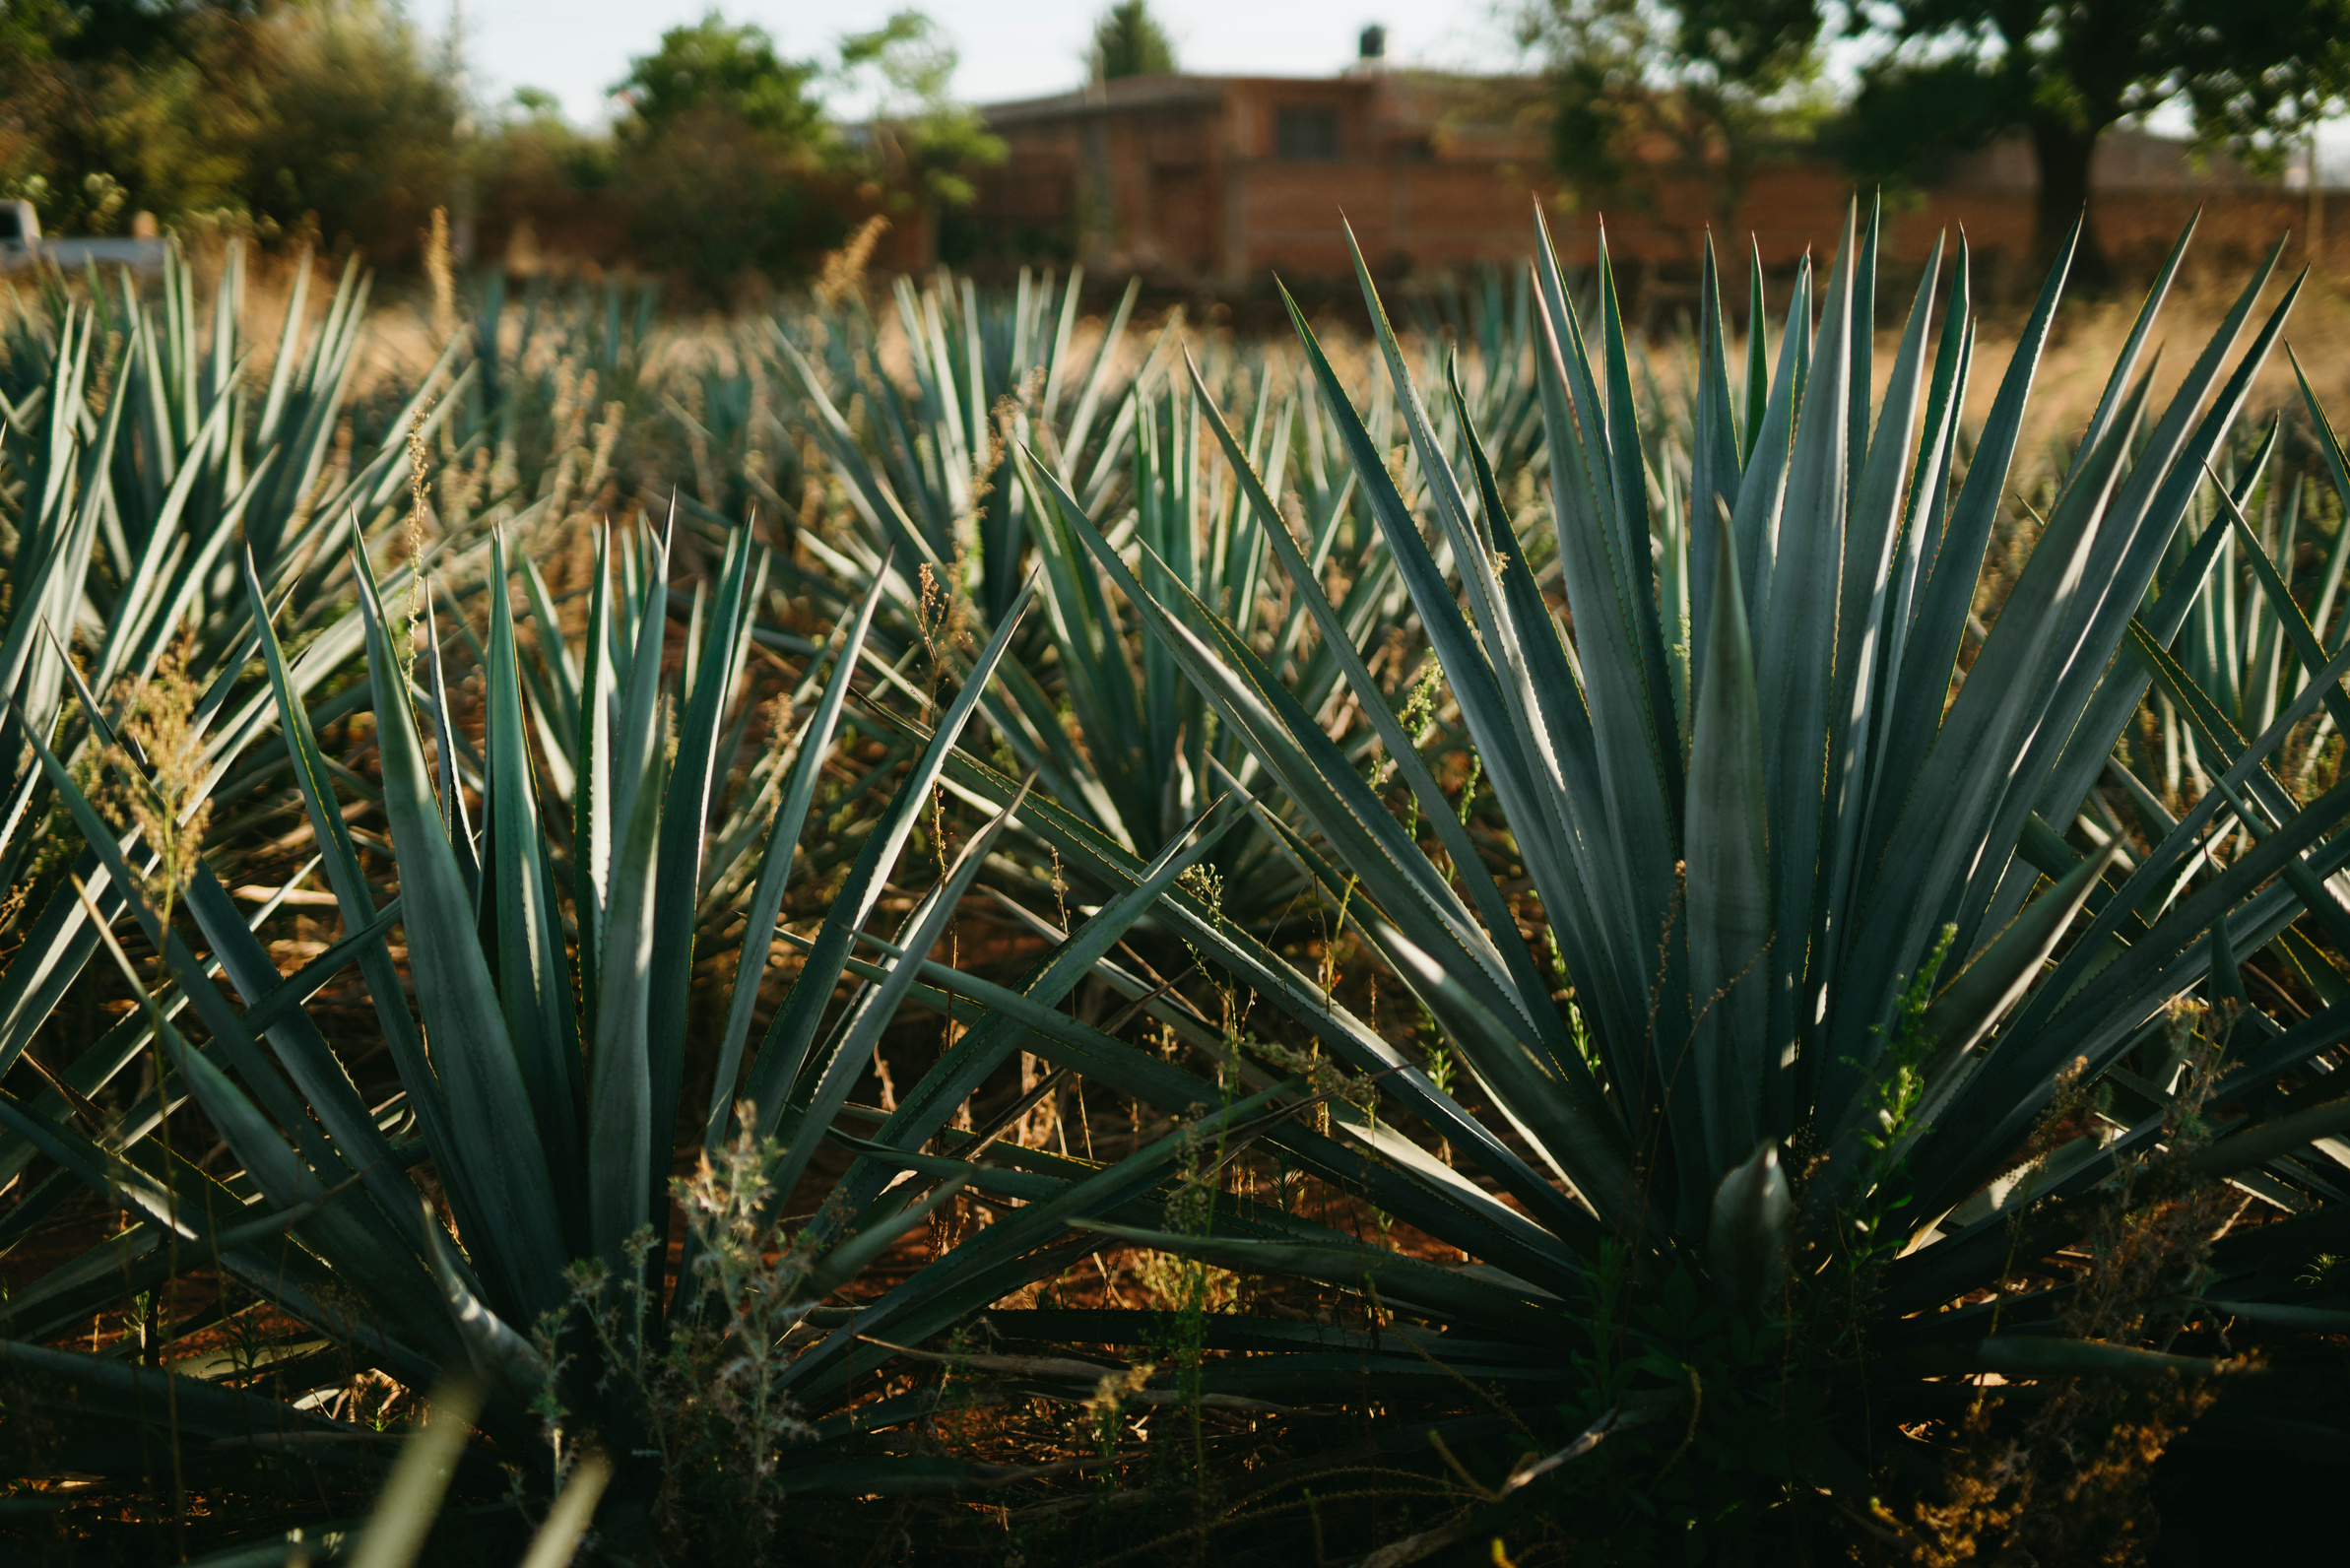 Agave Plants in the Farm